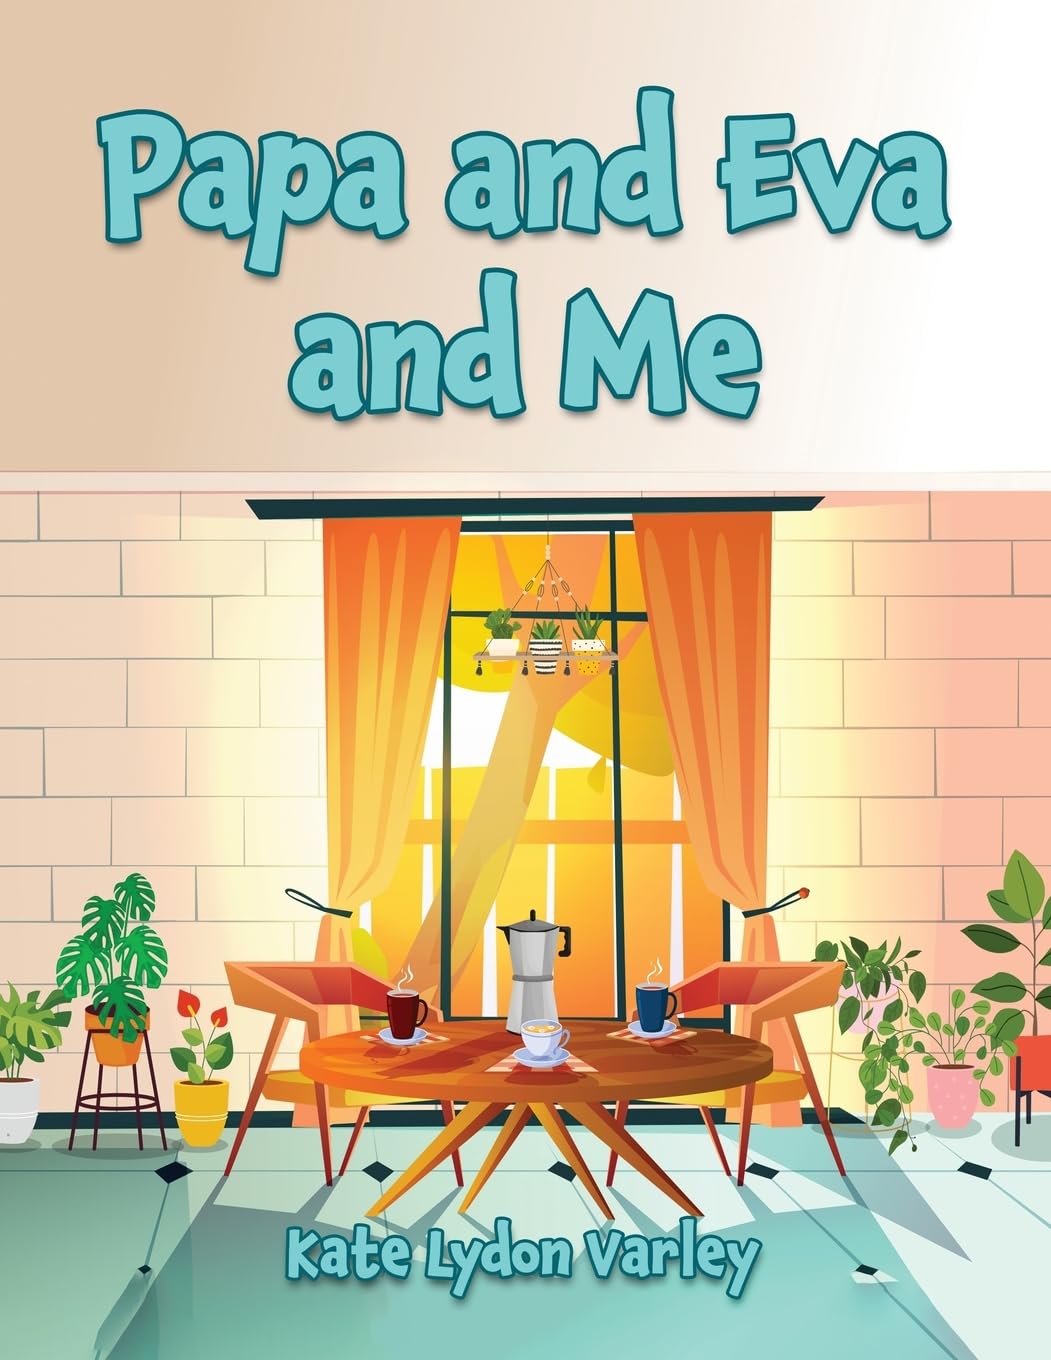 "Papa and Eva and Me" - A Heartfelt Tale of Family, Love, and Legacy